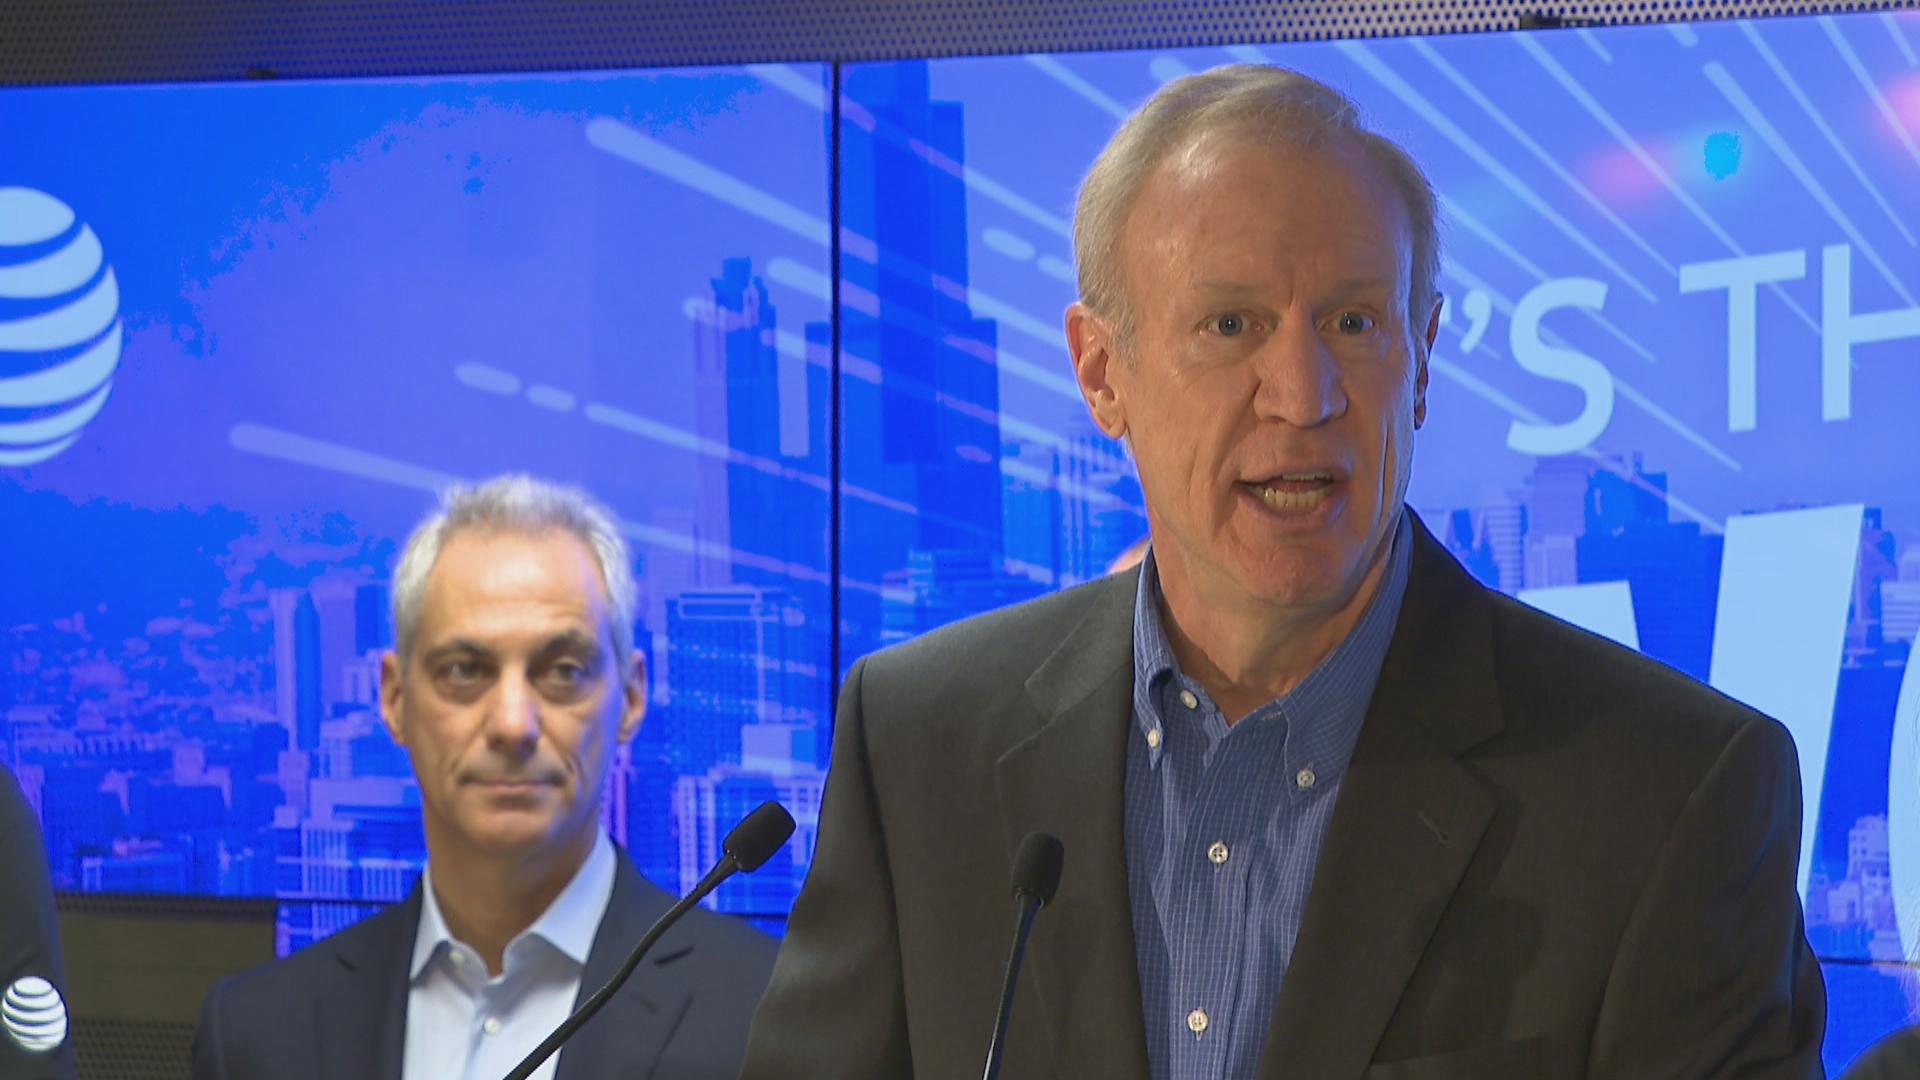 Gov. Bruce Rauner speaks Wednesday at a ribbon-cutting for a new AT&T call center on the Northwest Side. (Chicago Tonight)